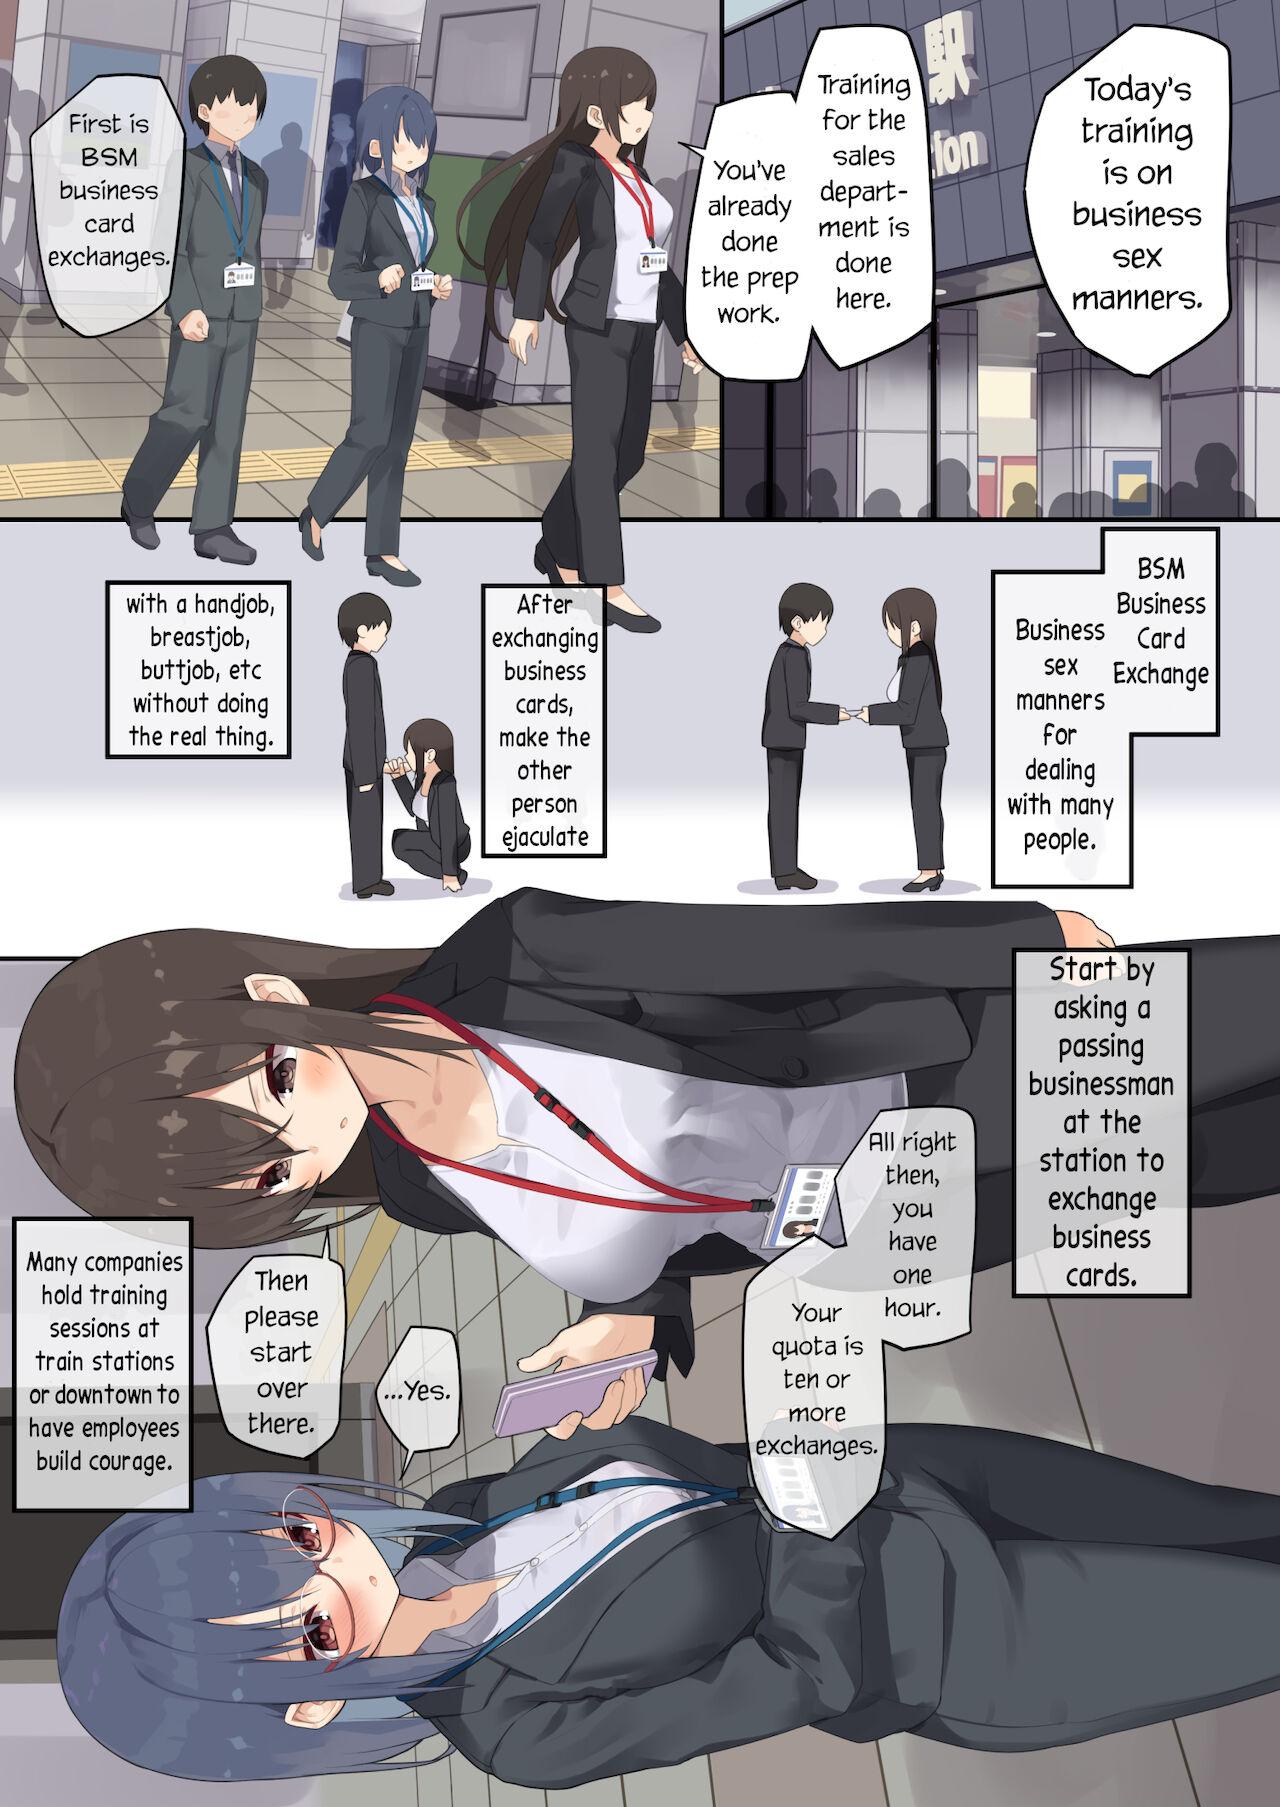 Sexy Whores Business Sex Manner Shinsotsu Hen | Business Sex Manners - Original Foda - Page 8